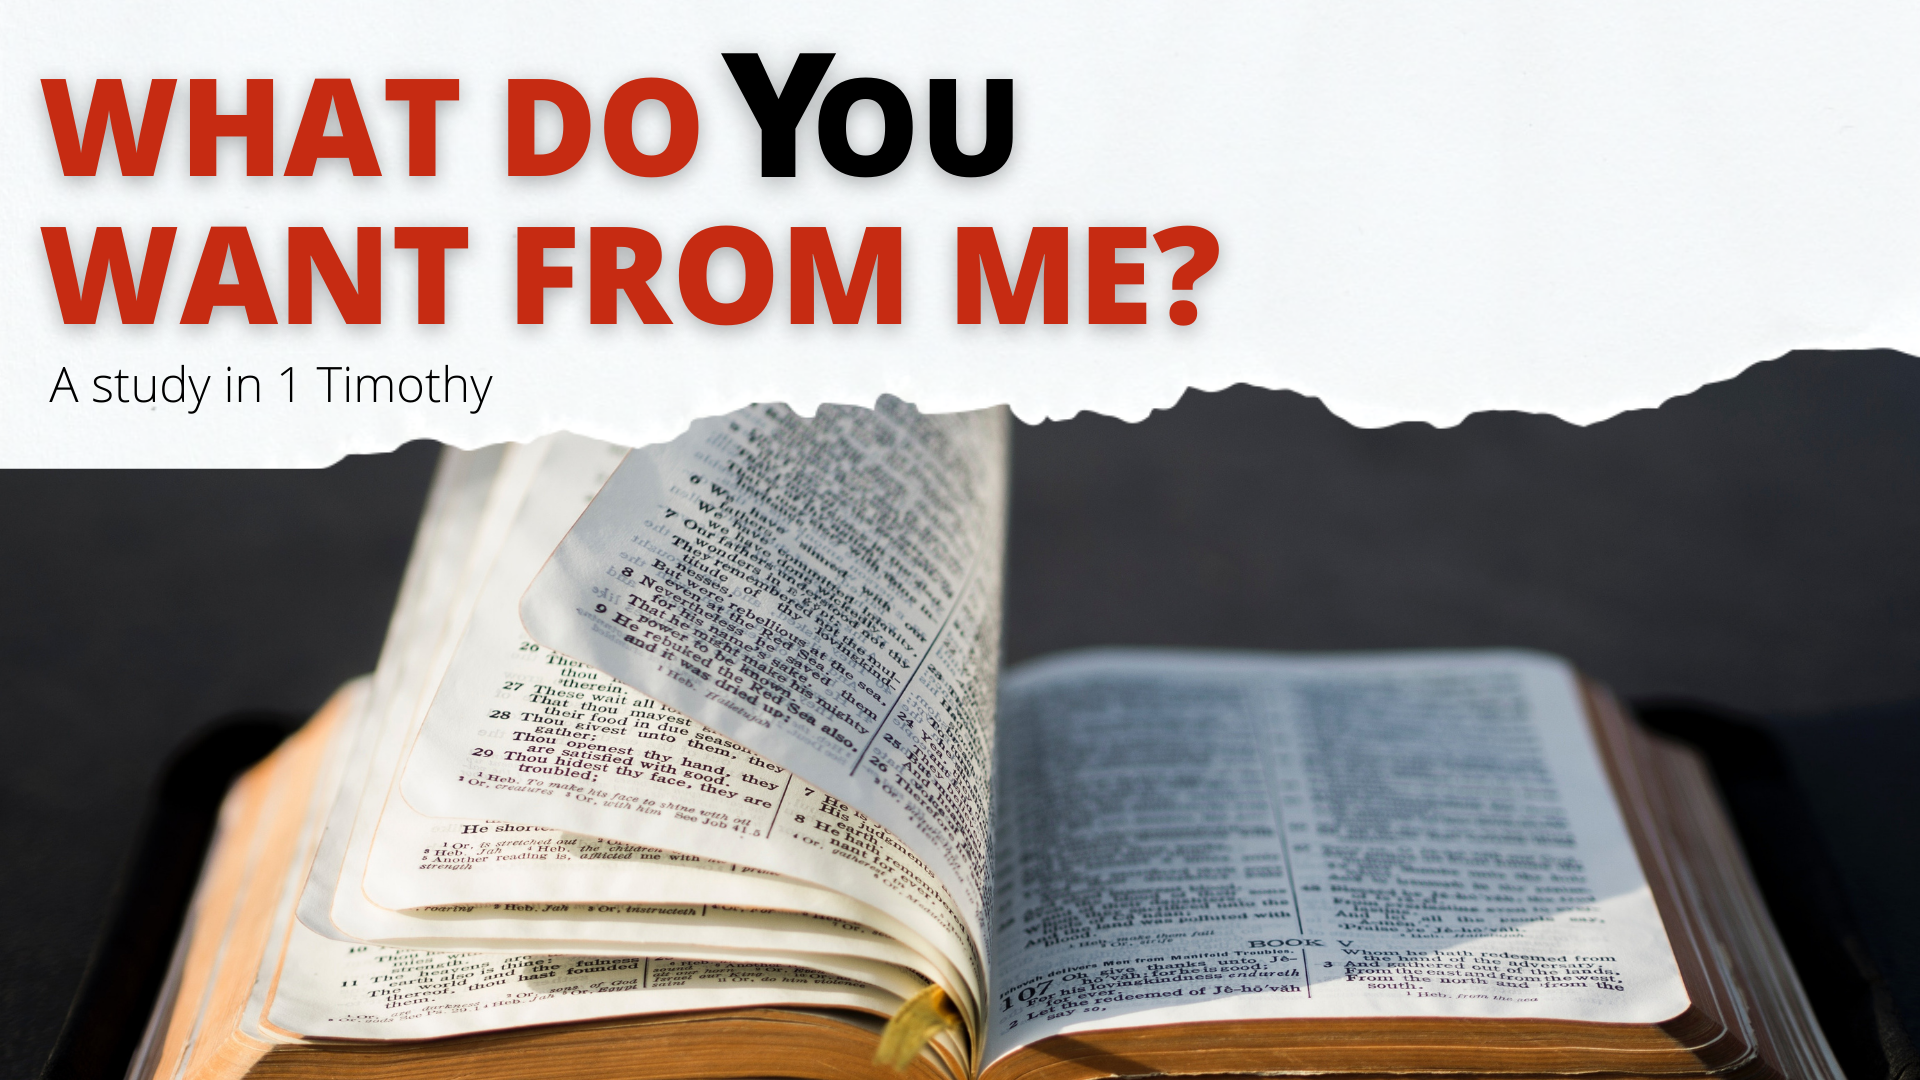 God wants me to take the GOSPEL seriously